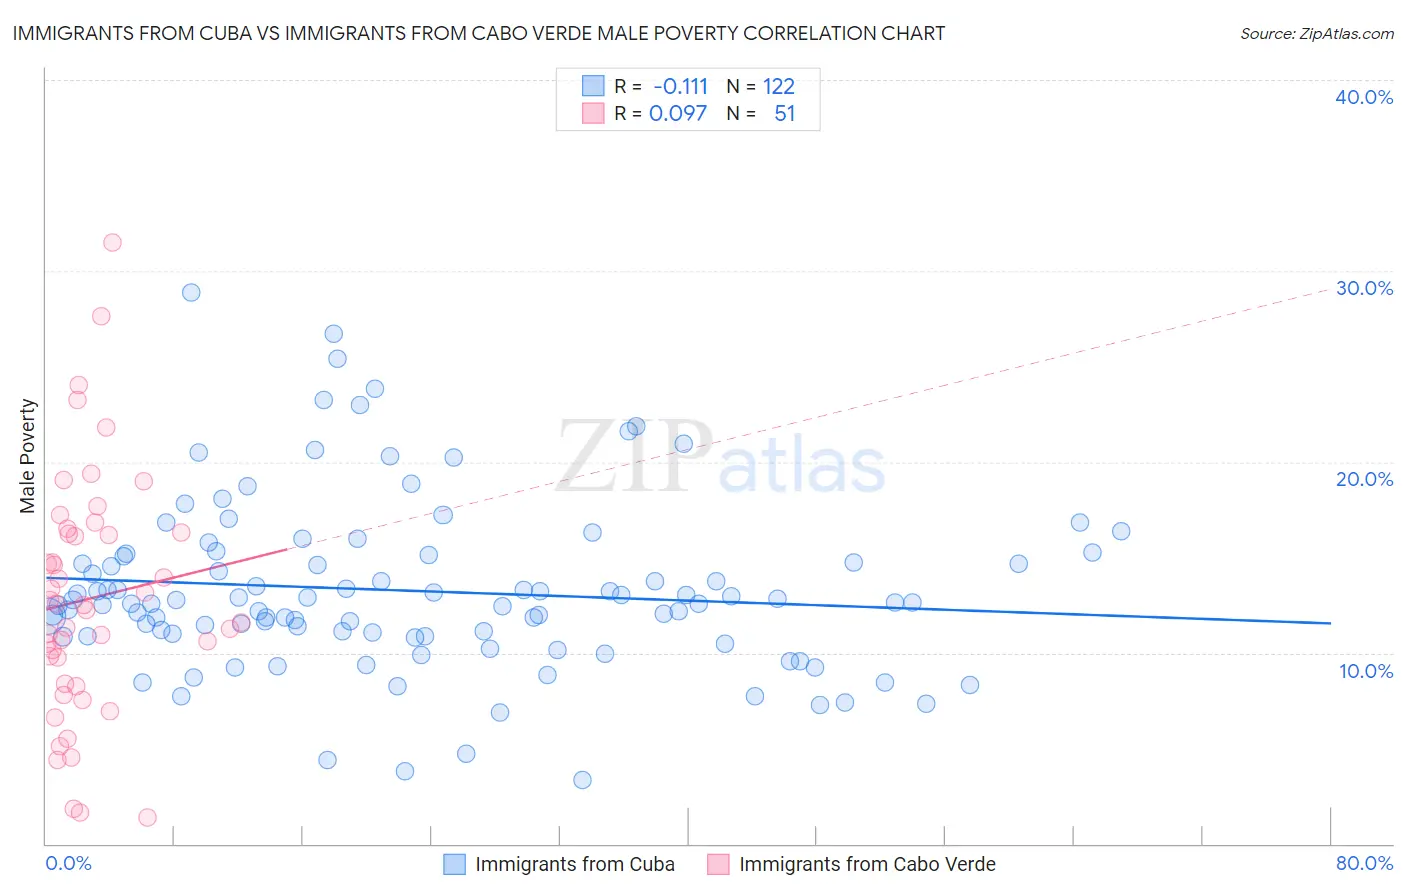 Immigrants from Cuba vs Immigrants from Cabo Verde Male Poverty